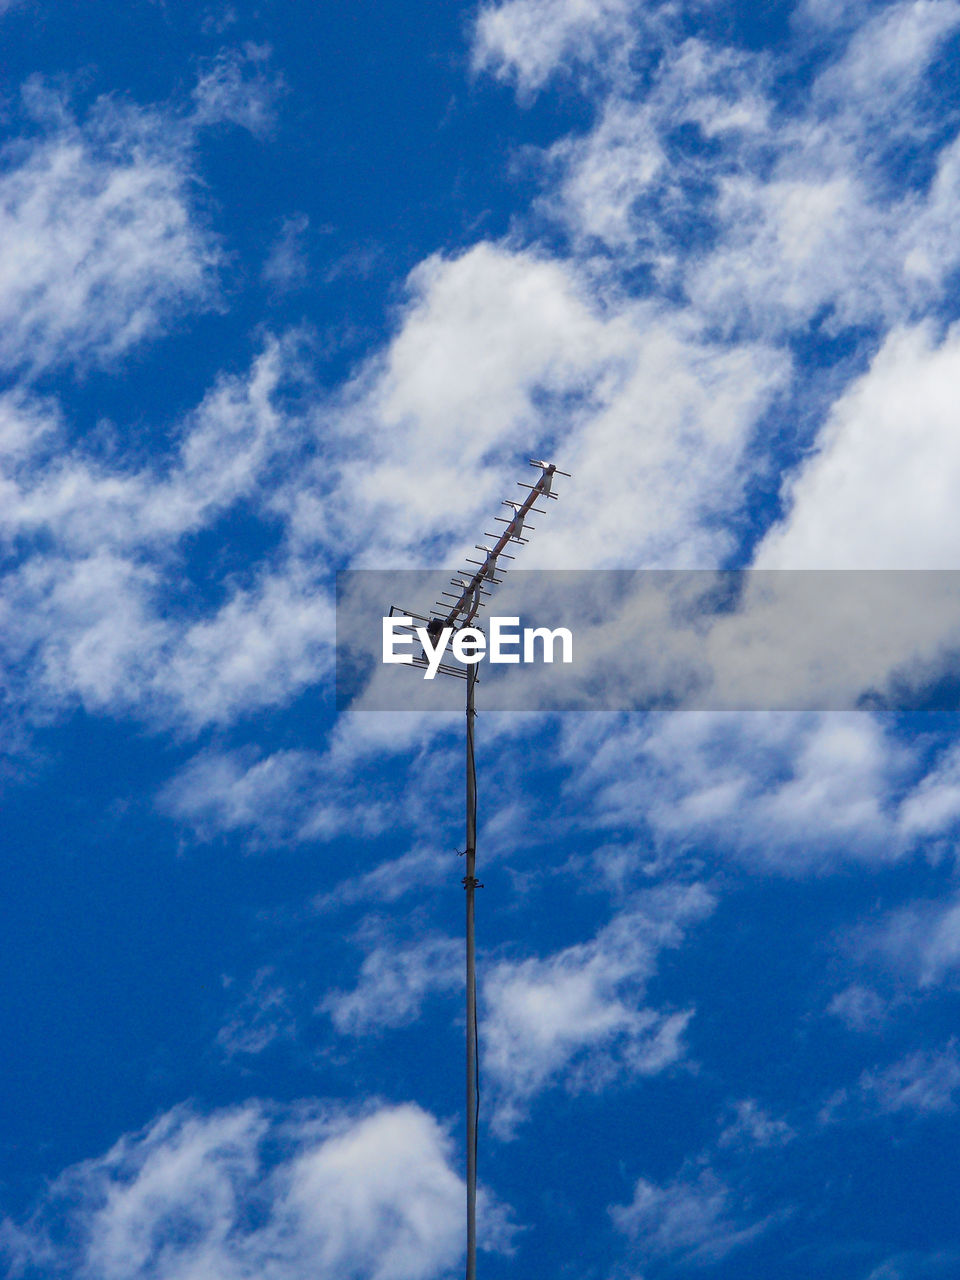 LOW ANGLE VIEW OF TELEPHONE POLE AGAINST BLUE SKY